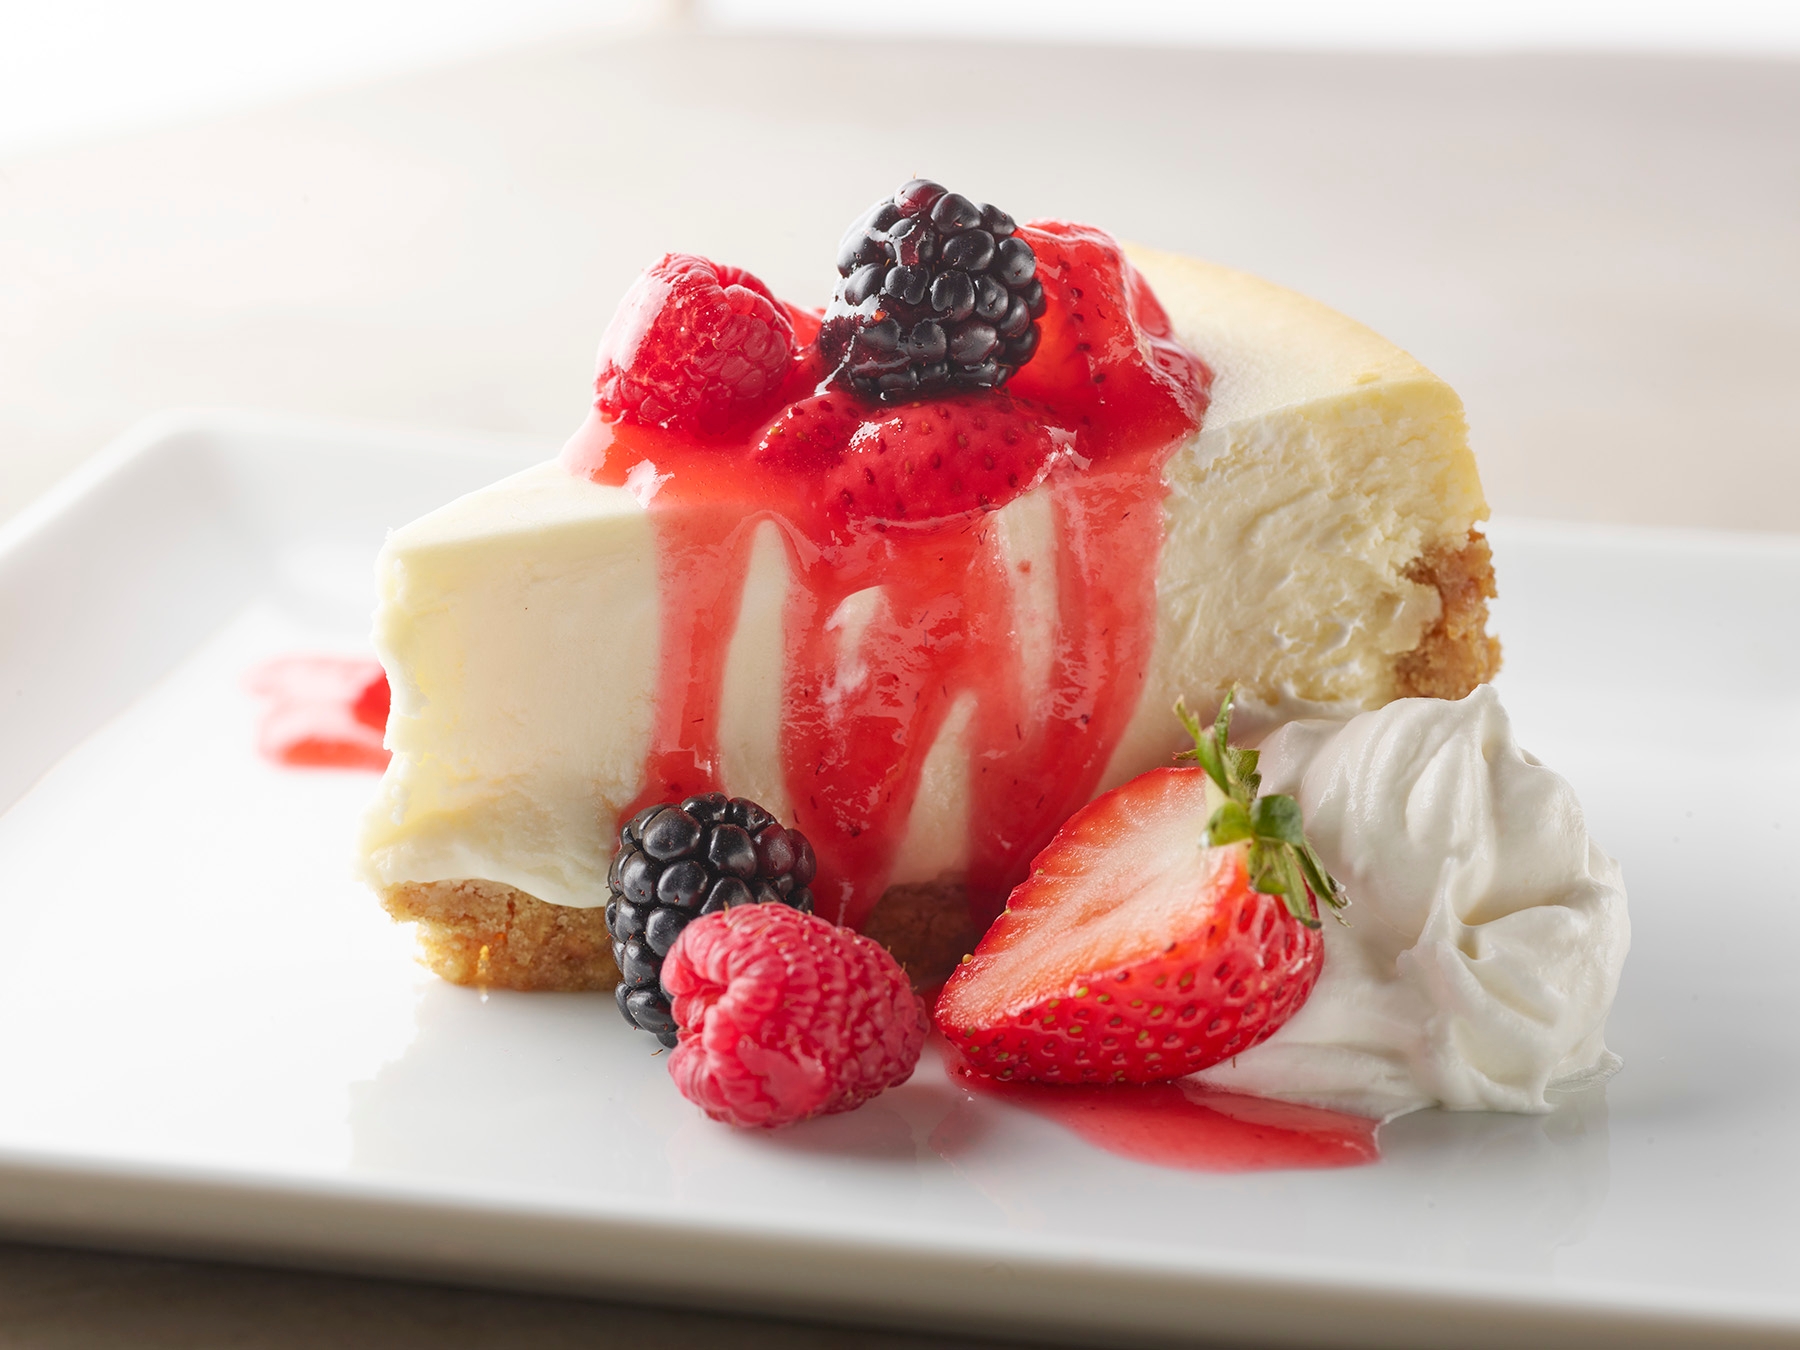 Creamy cheesecake with a graham cracker crust, topped with a decadent strawberry drizzle, mixed berries, and whipped cream.